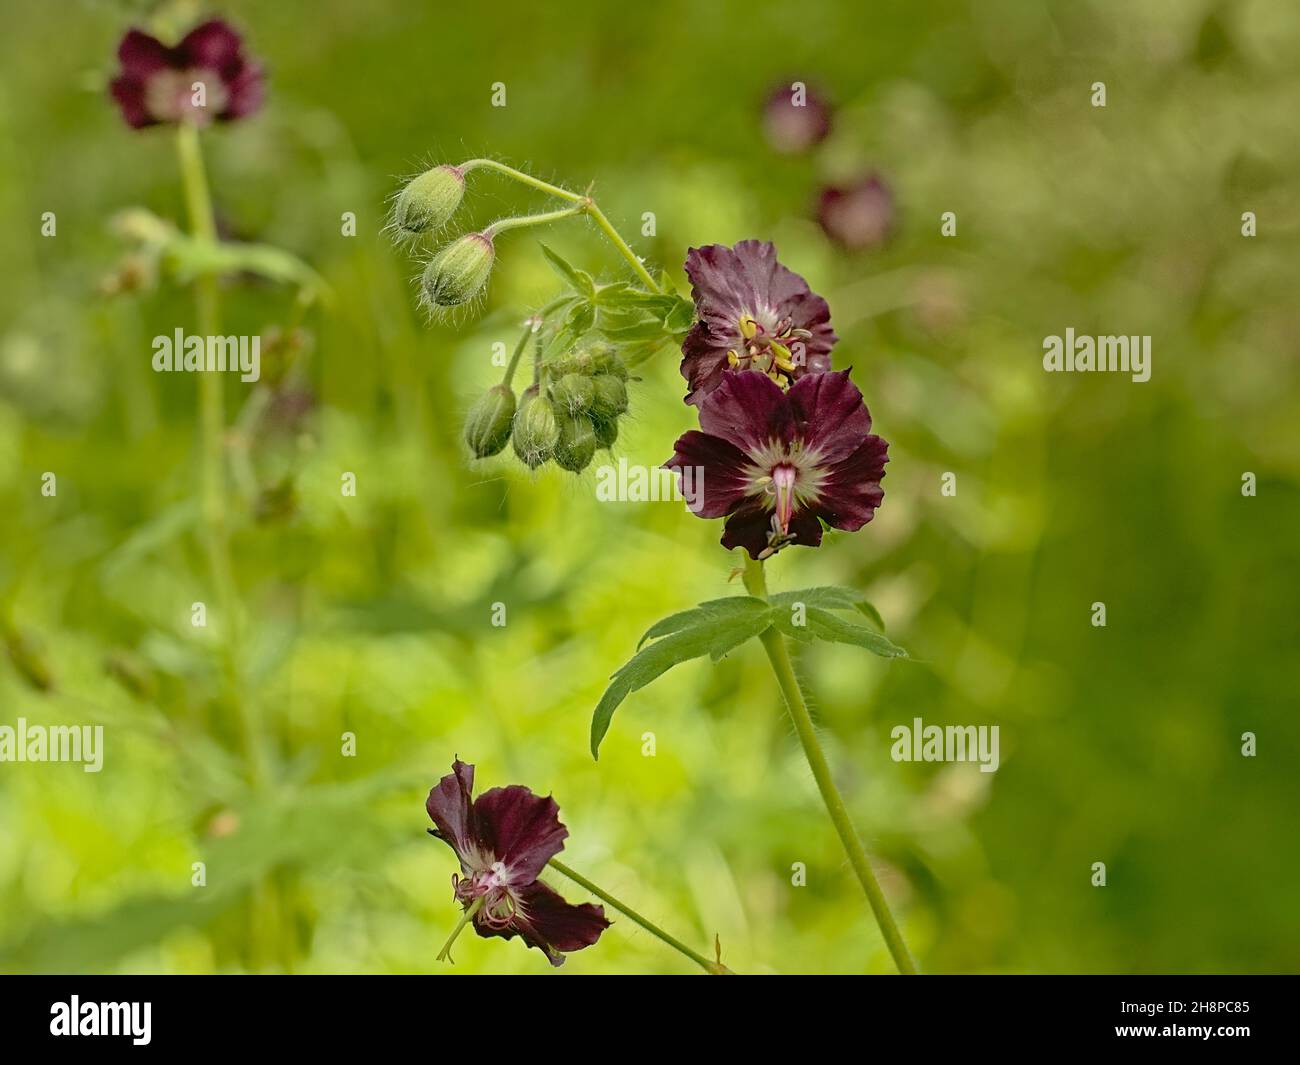 Green buds and dark violet flowers of a dusky cranesbill plant in the gaden, selective focus on a green bokeh background Stock Photo